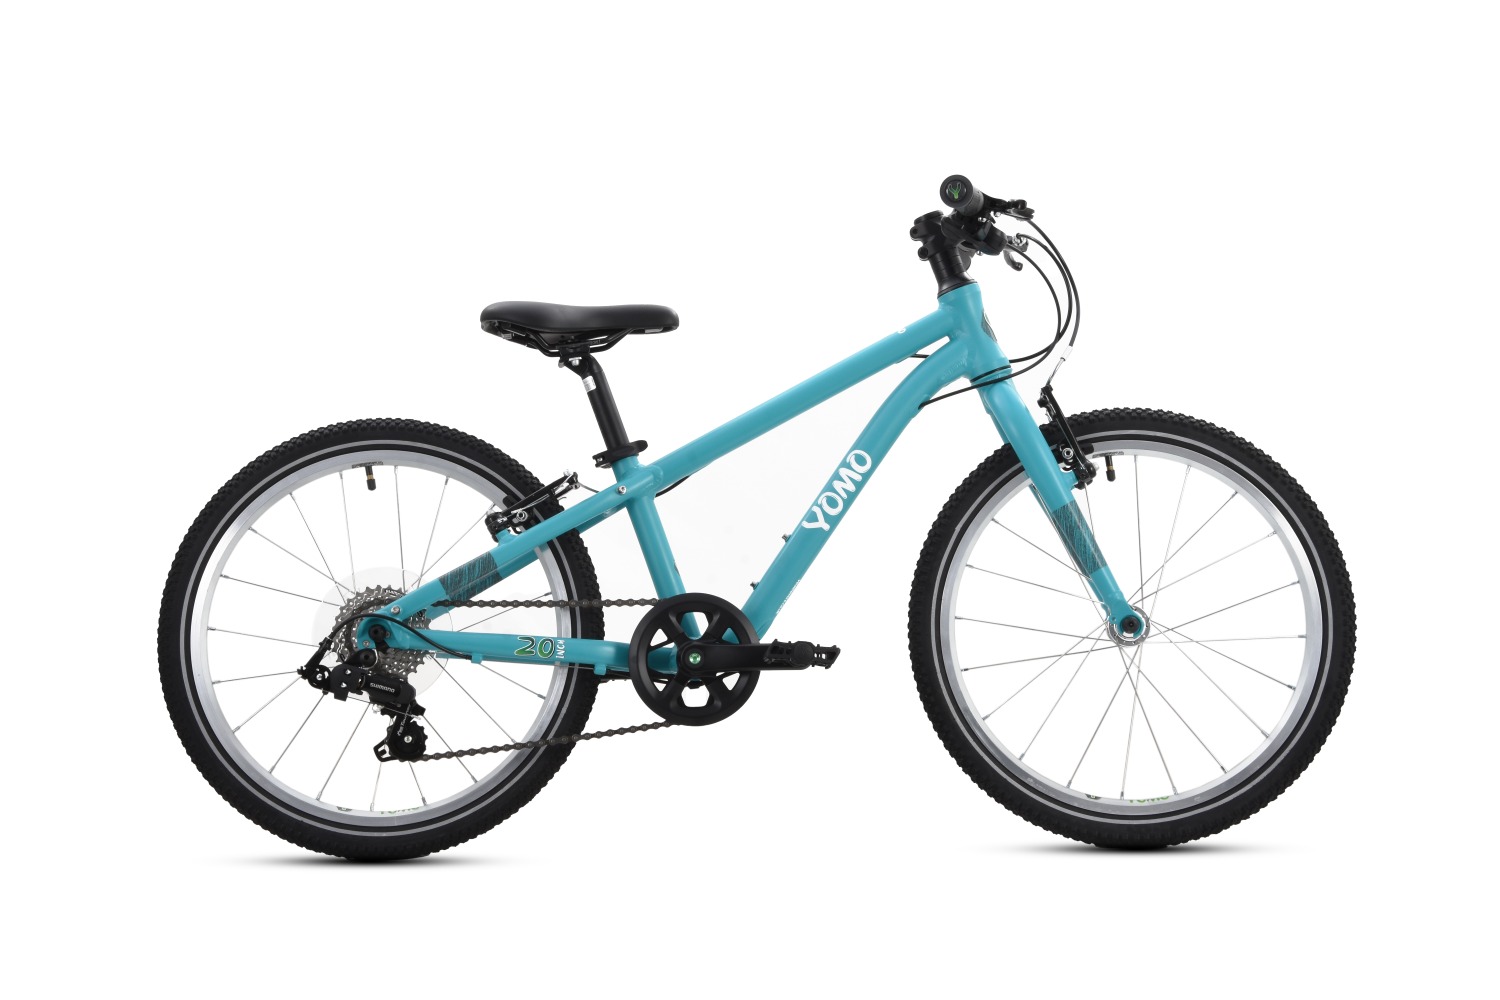 The YOMO 20 kids bike with gears in light blue / turquoise